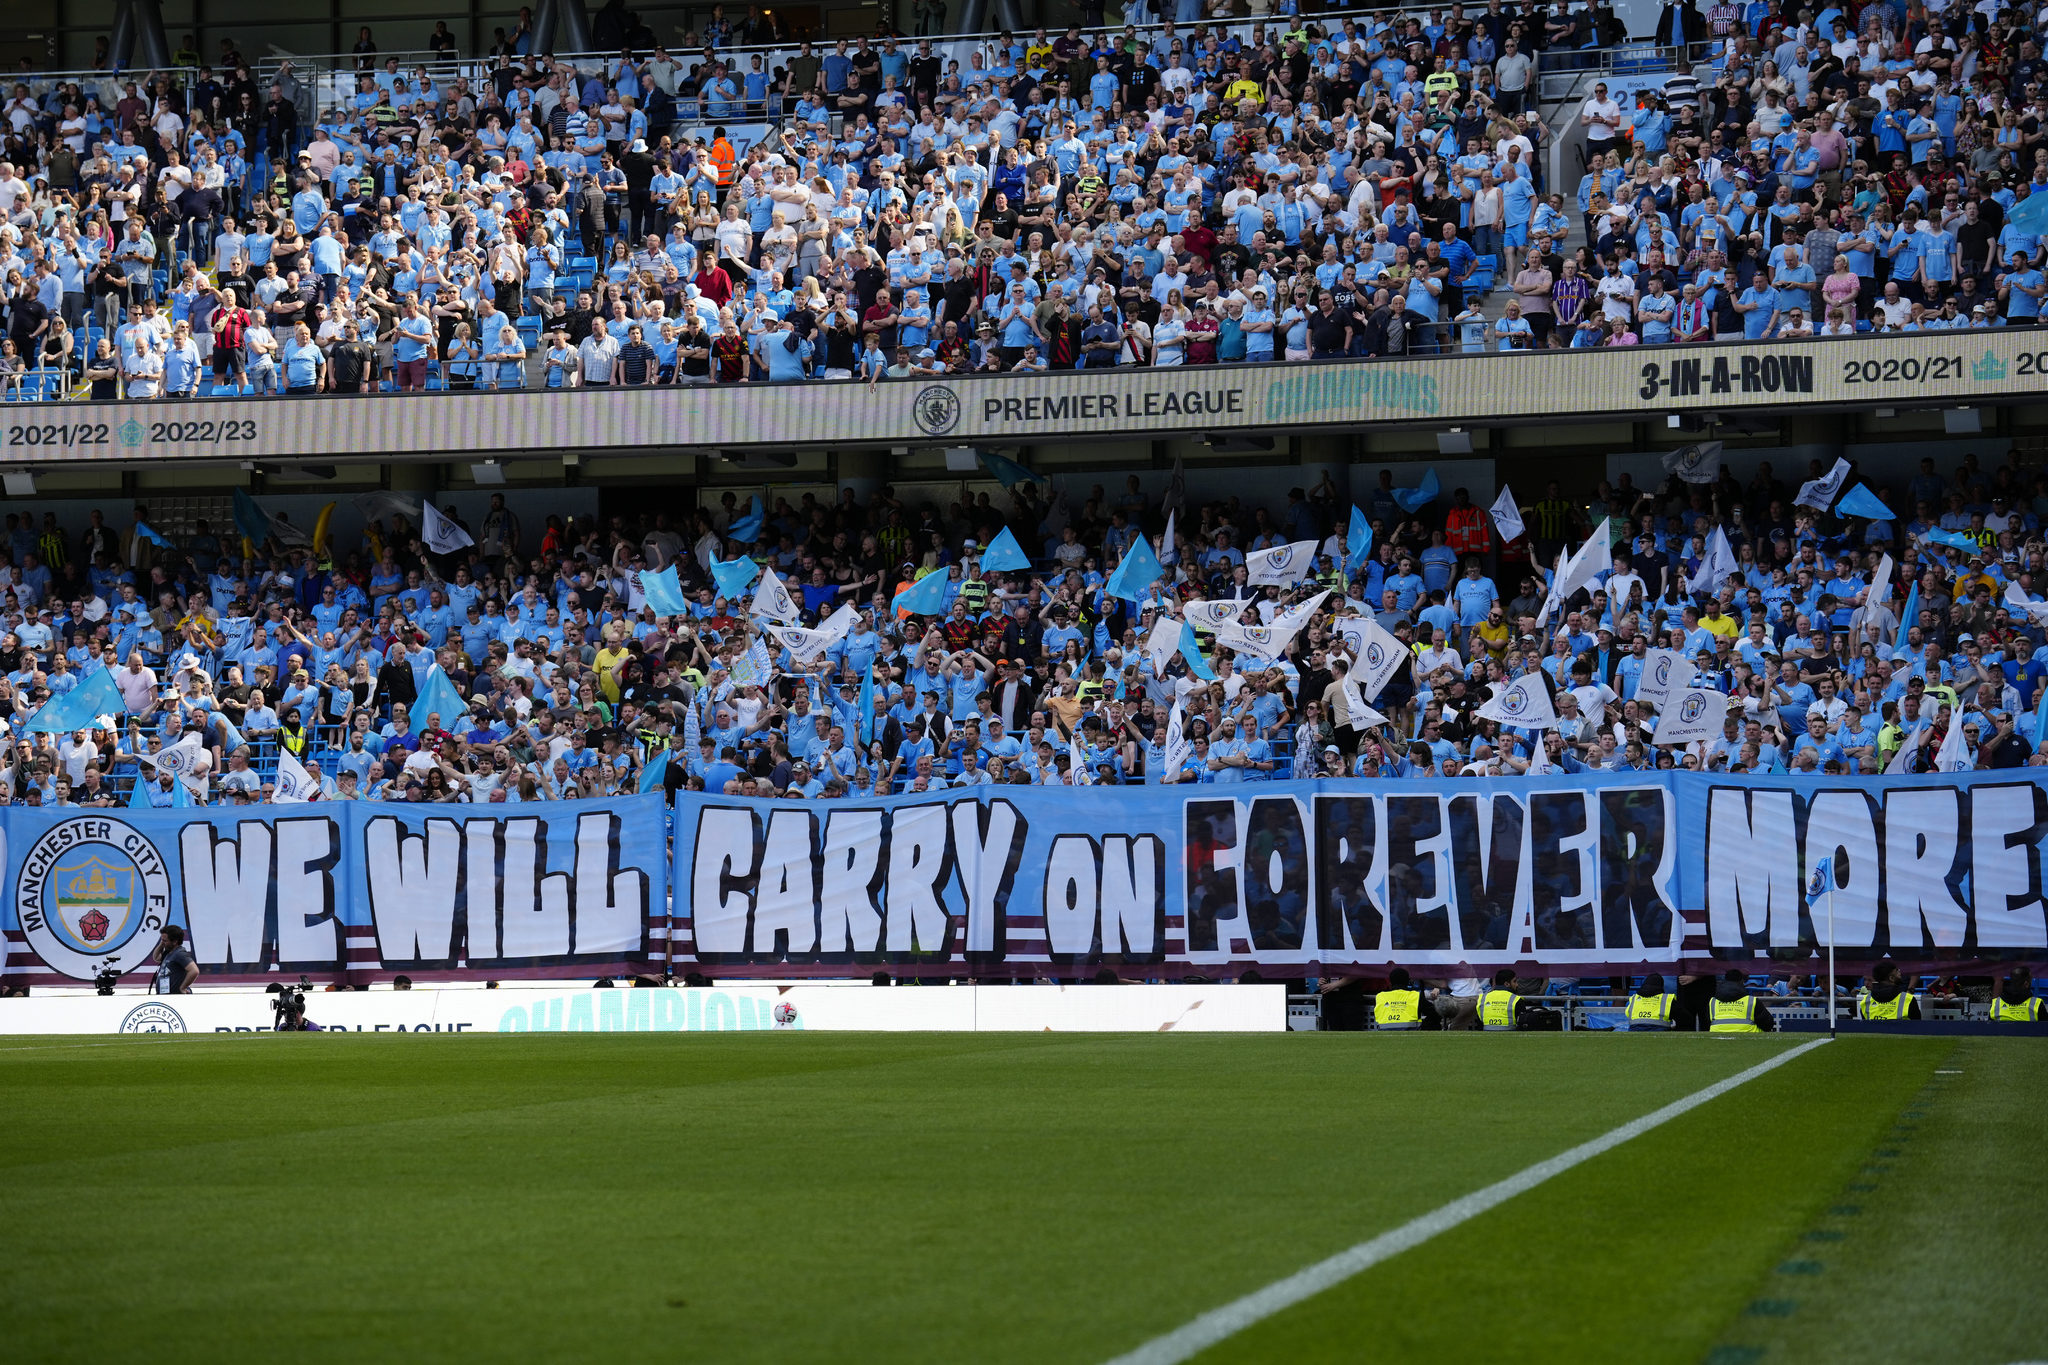 Supporters cheer before the English Premier League soccer match between  lt;HIT gt;Manchester lt;/HIT gt; City and Chelsea at the Etihad Stadium in  lt;HIT gt;Manchester lt;/HIT gt;, England, Sunday, May 21, 2023. (AP Photo/Jon Super)